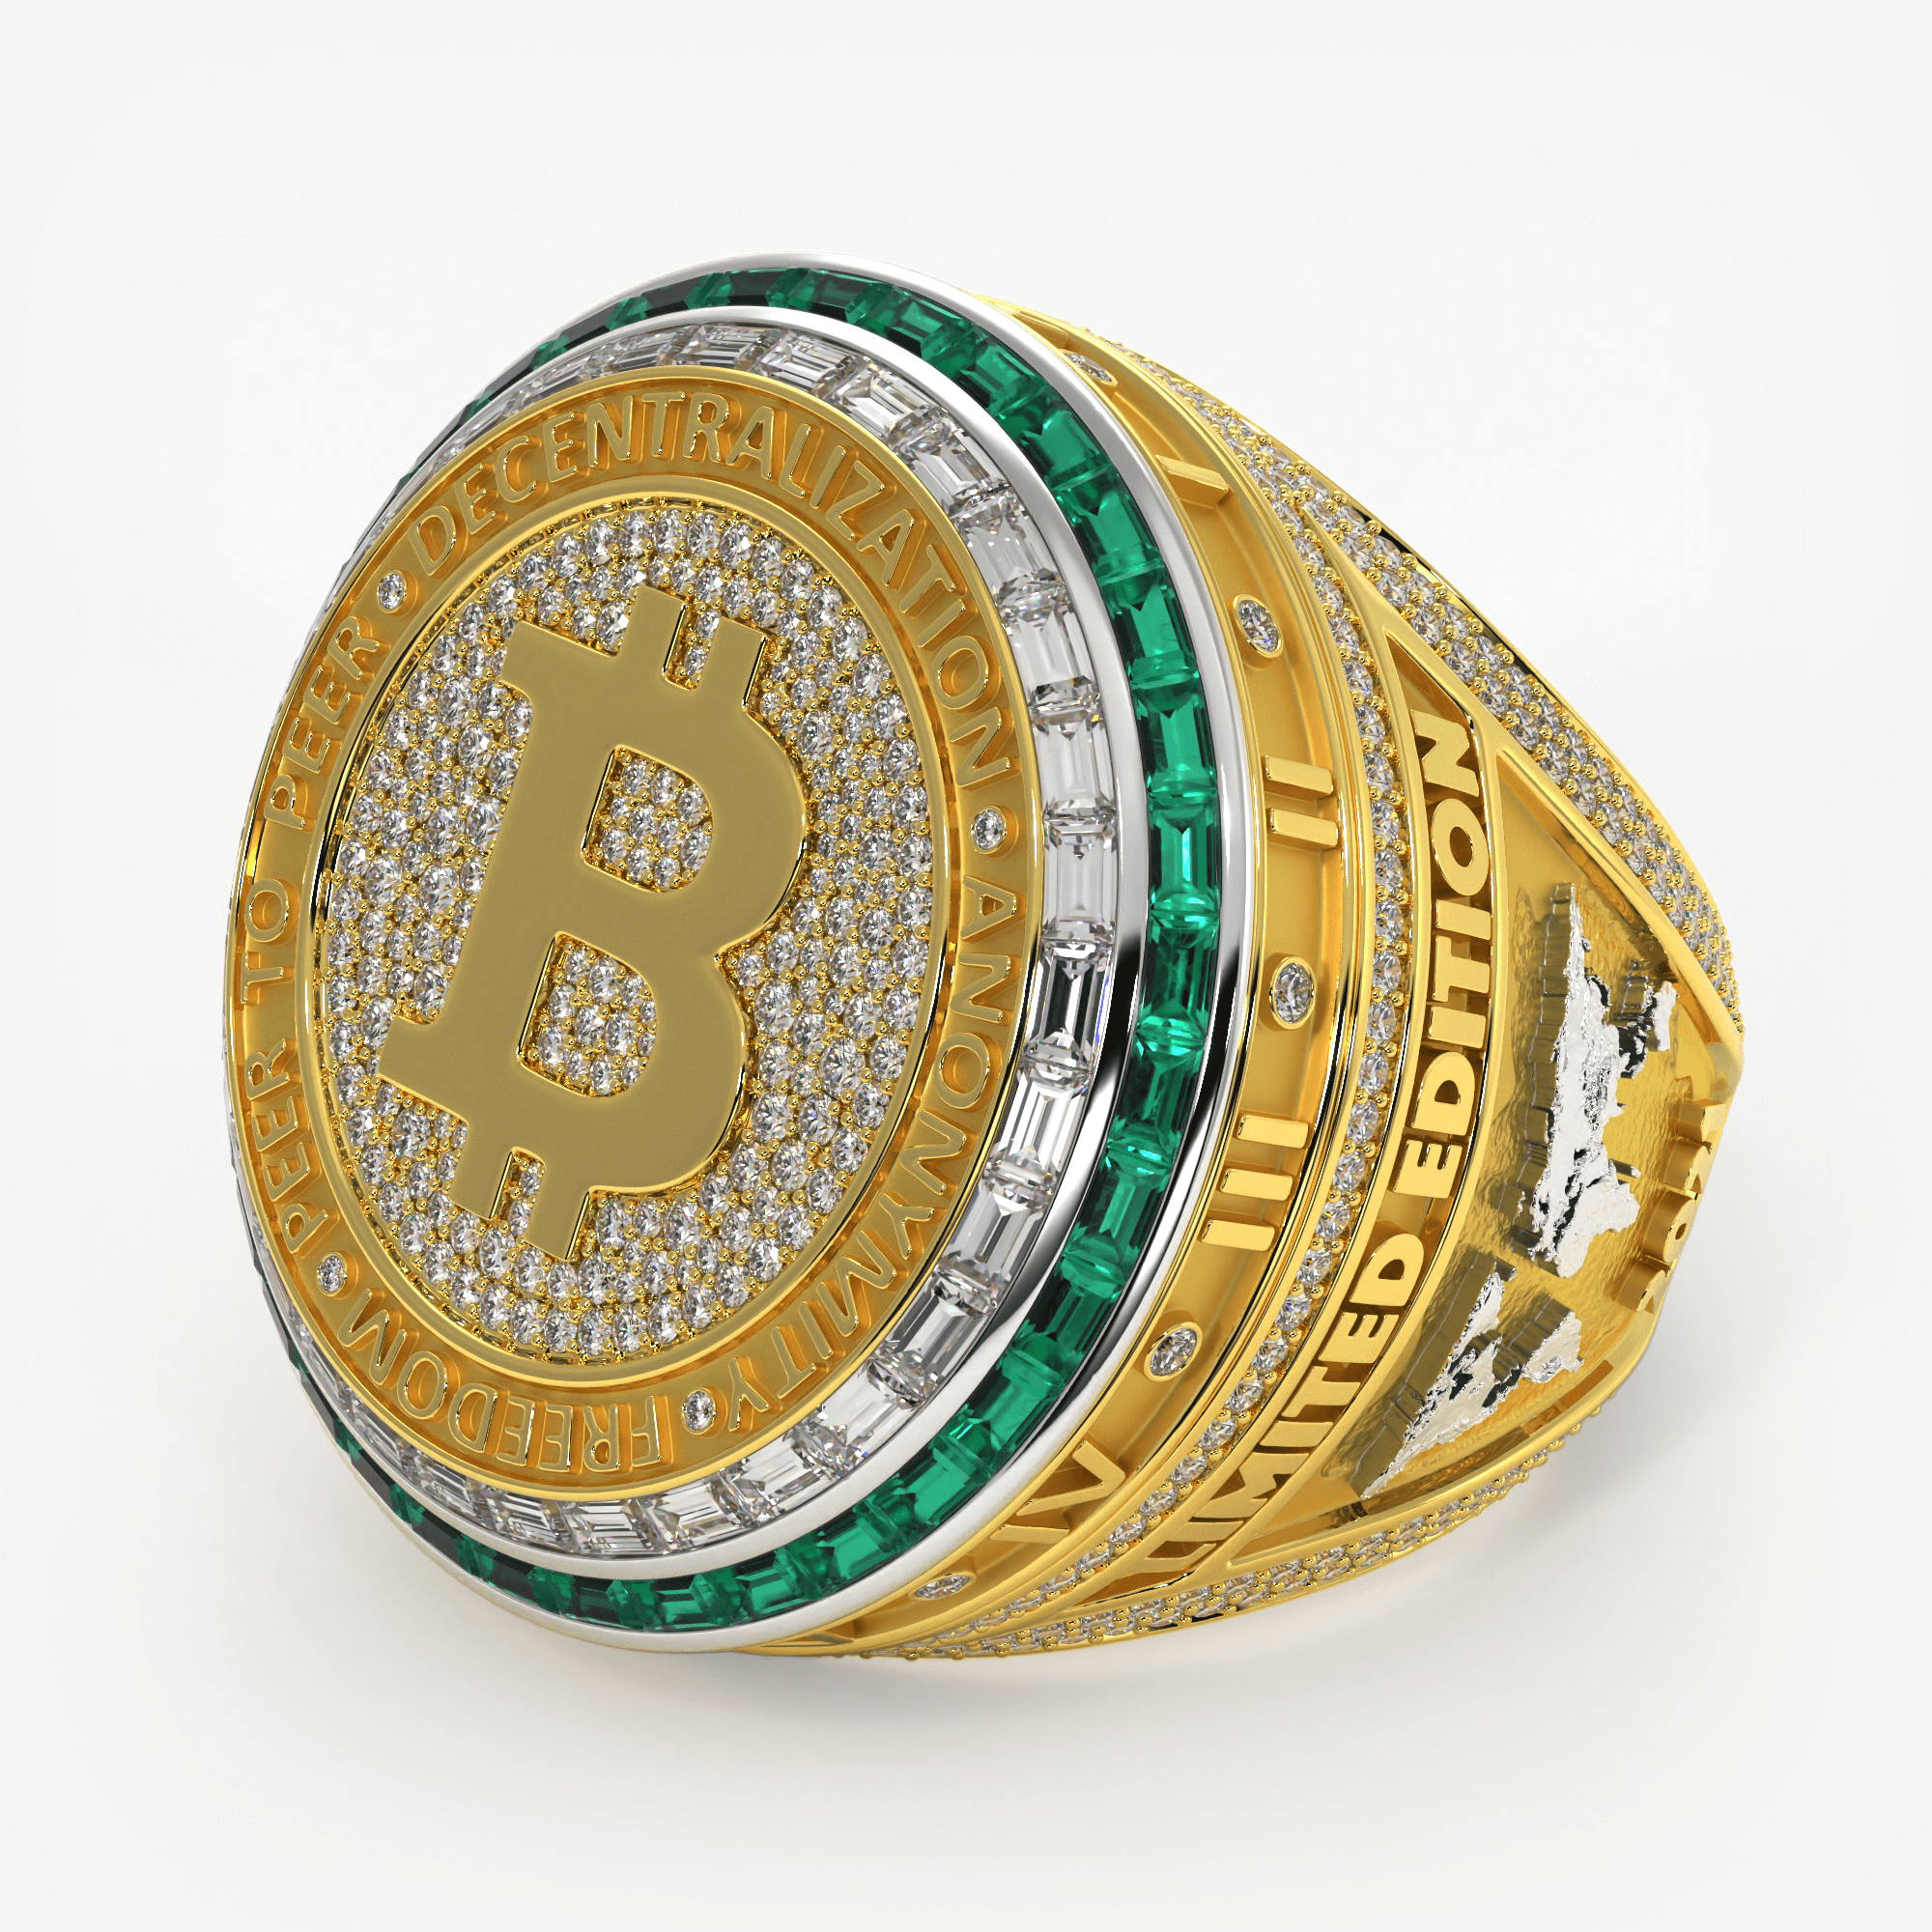 In Bitcoin We Trust ring 03/100 edition